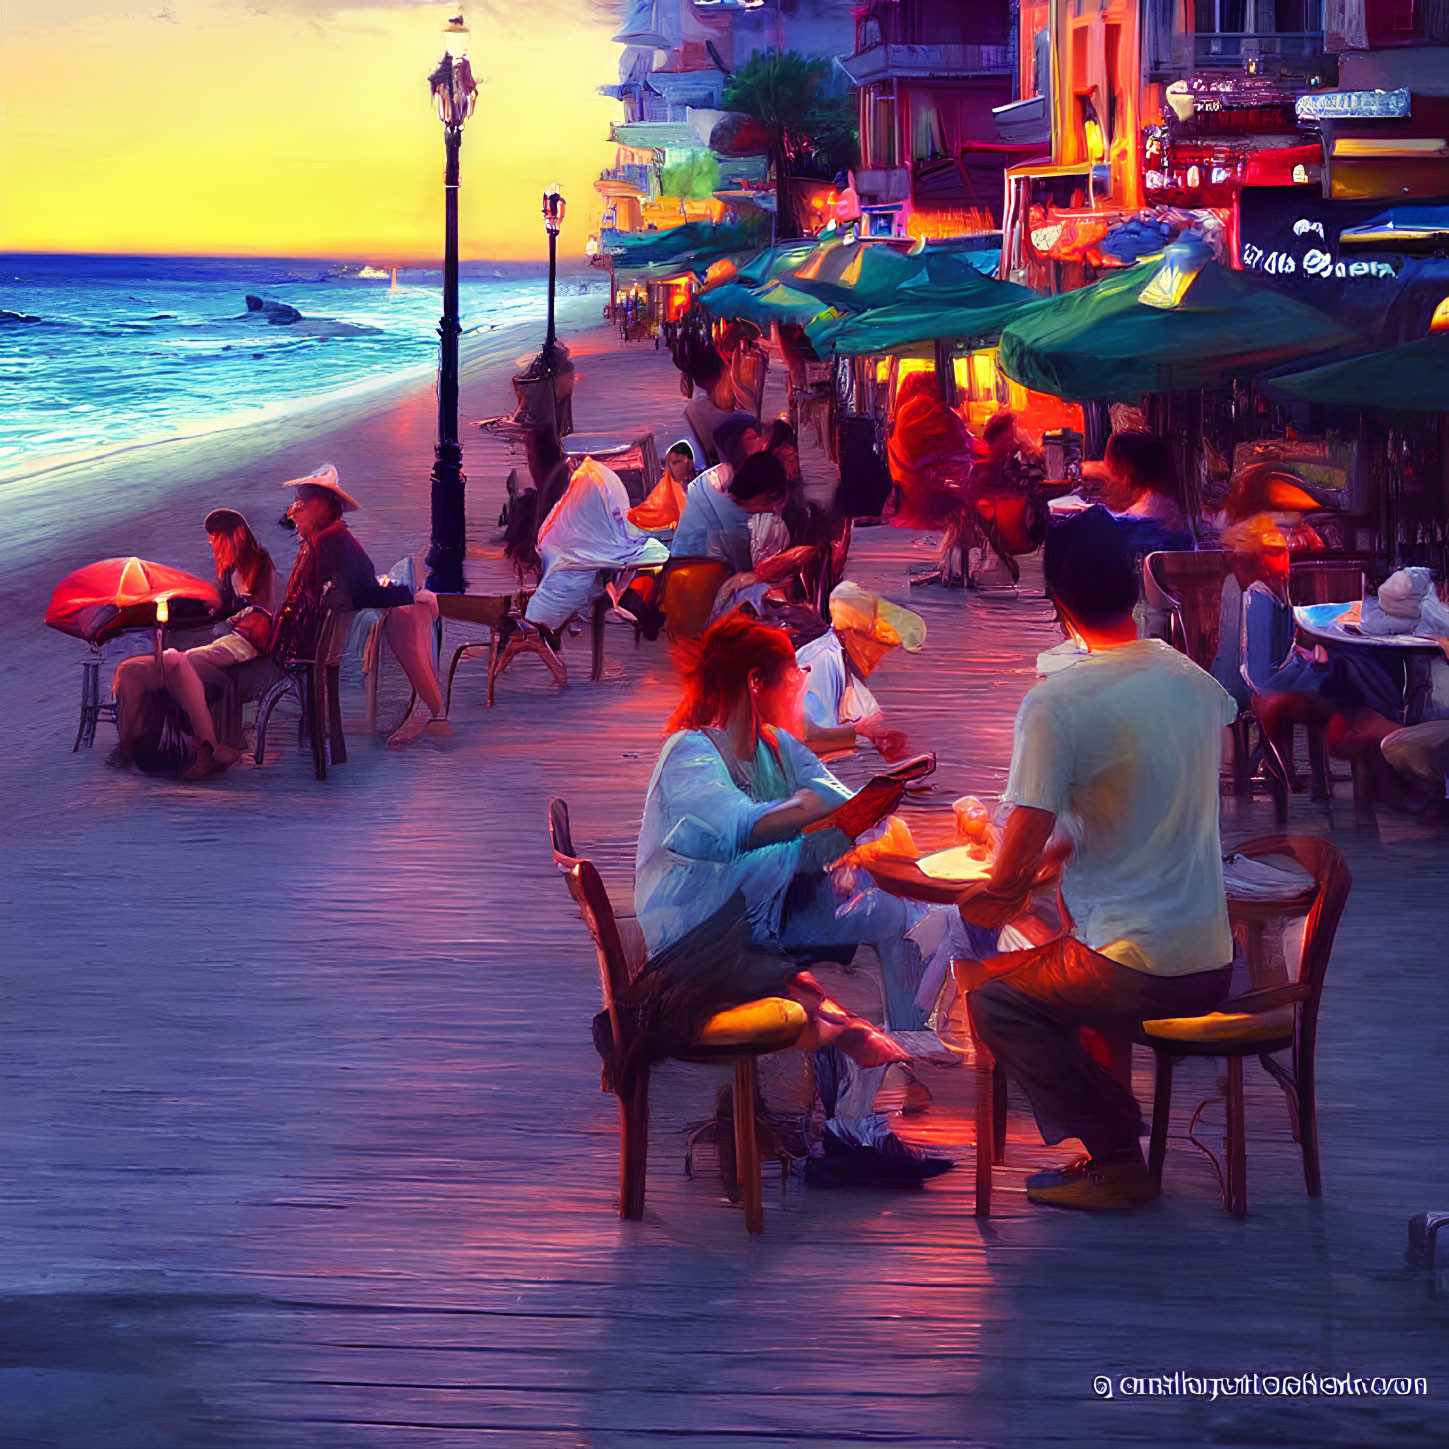 evening cafe on the seashore.